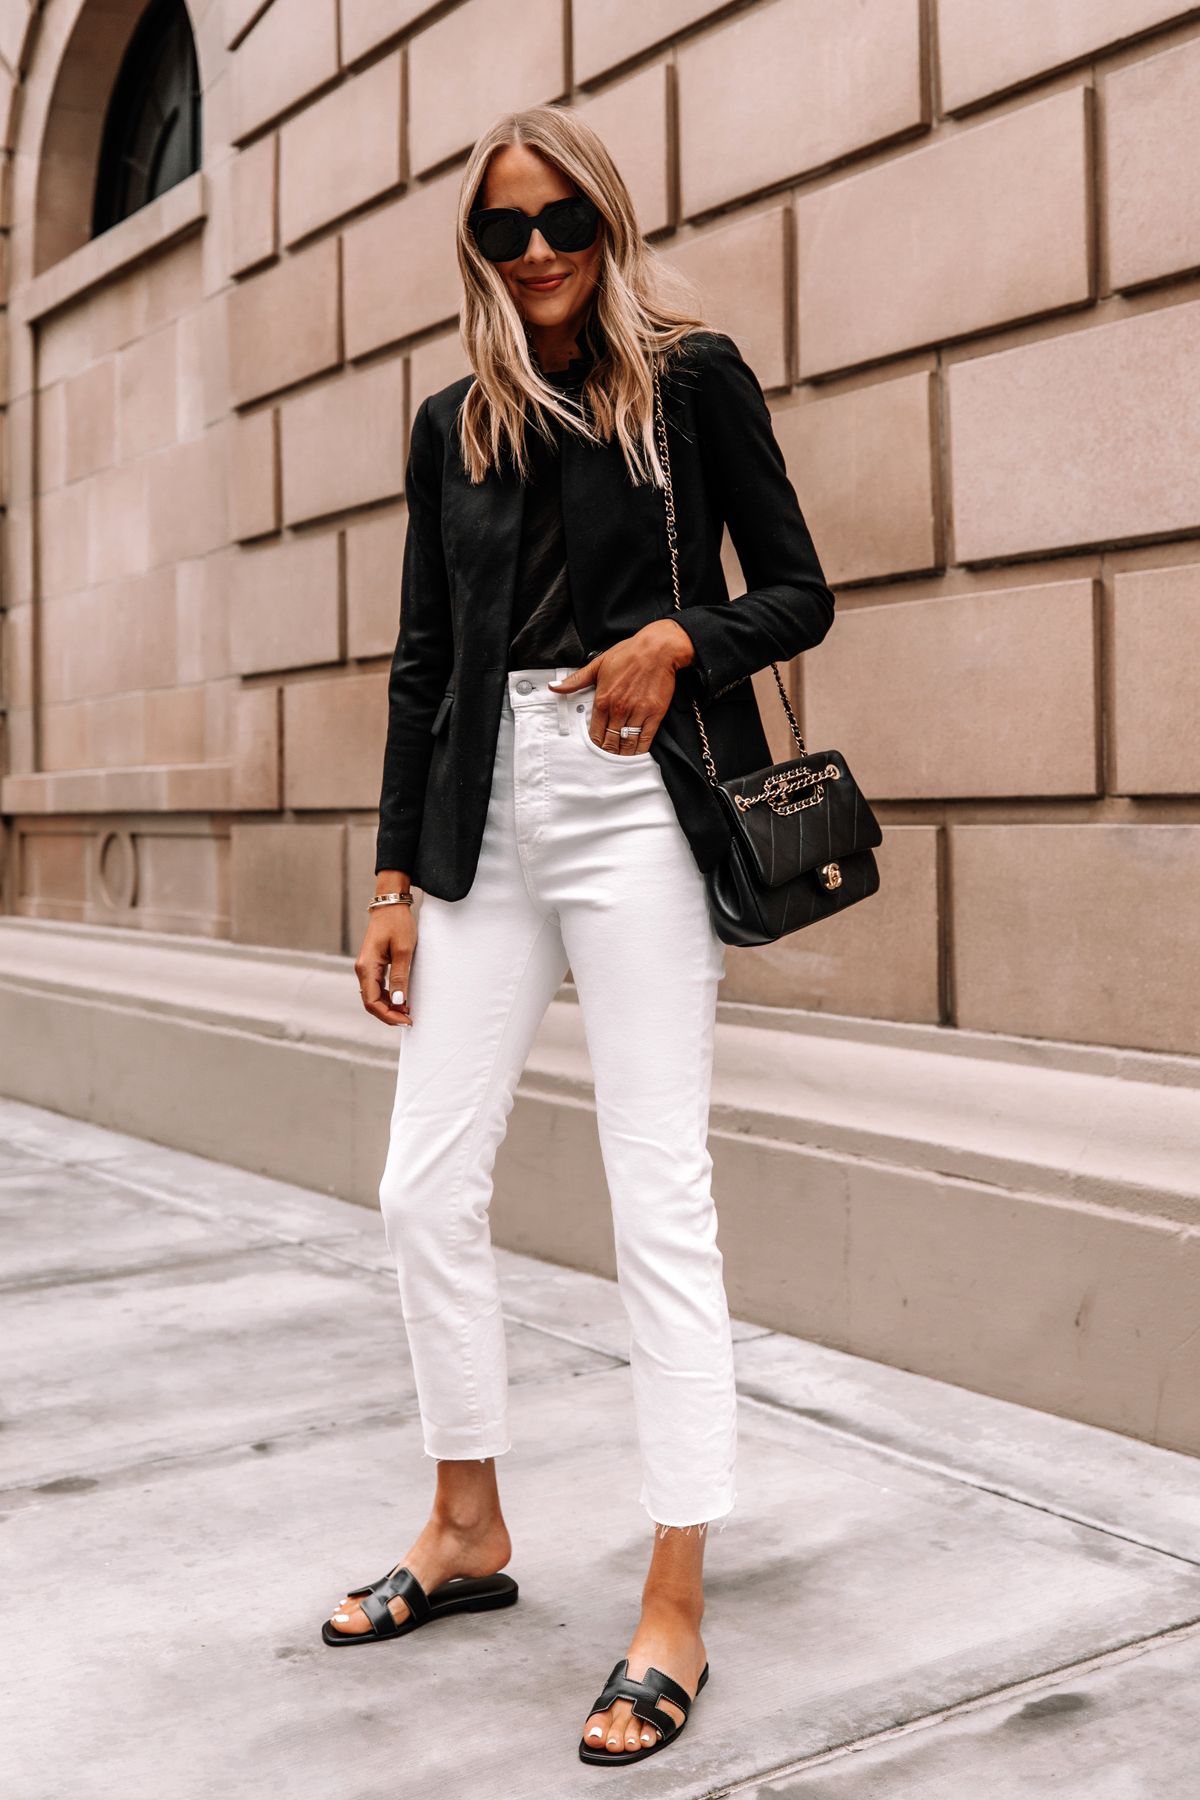 Utrolig orm Begyndelsen White Jeans | You Have Them, Now Let's Talk About How to Style Them